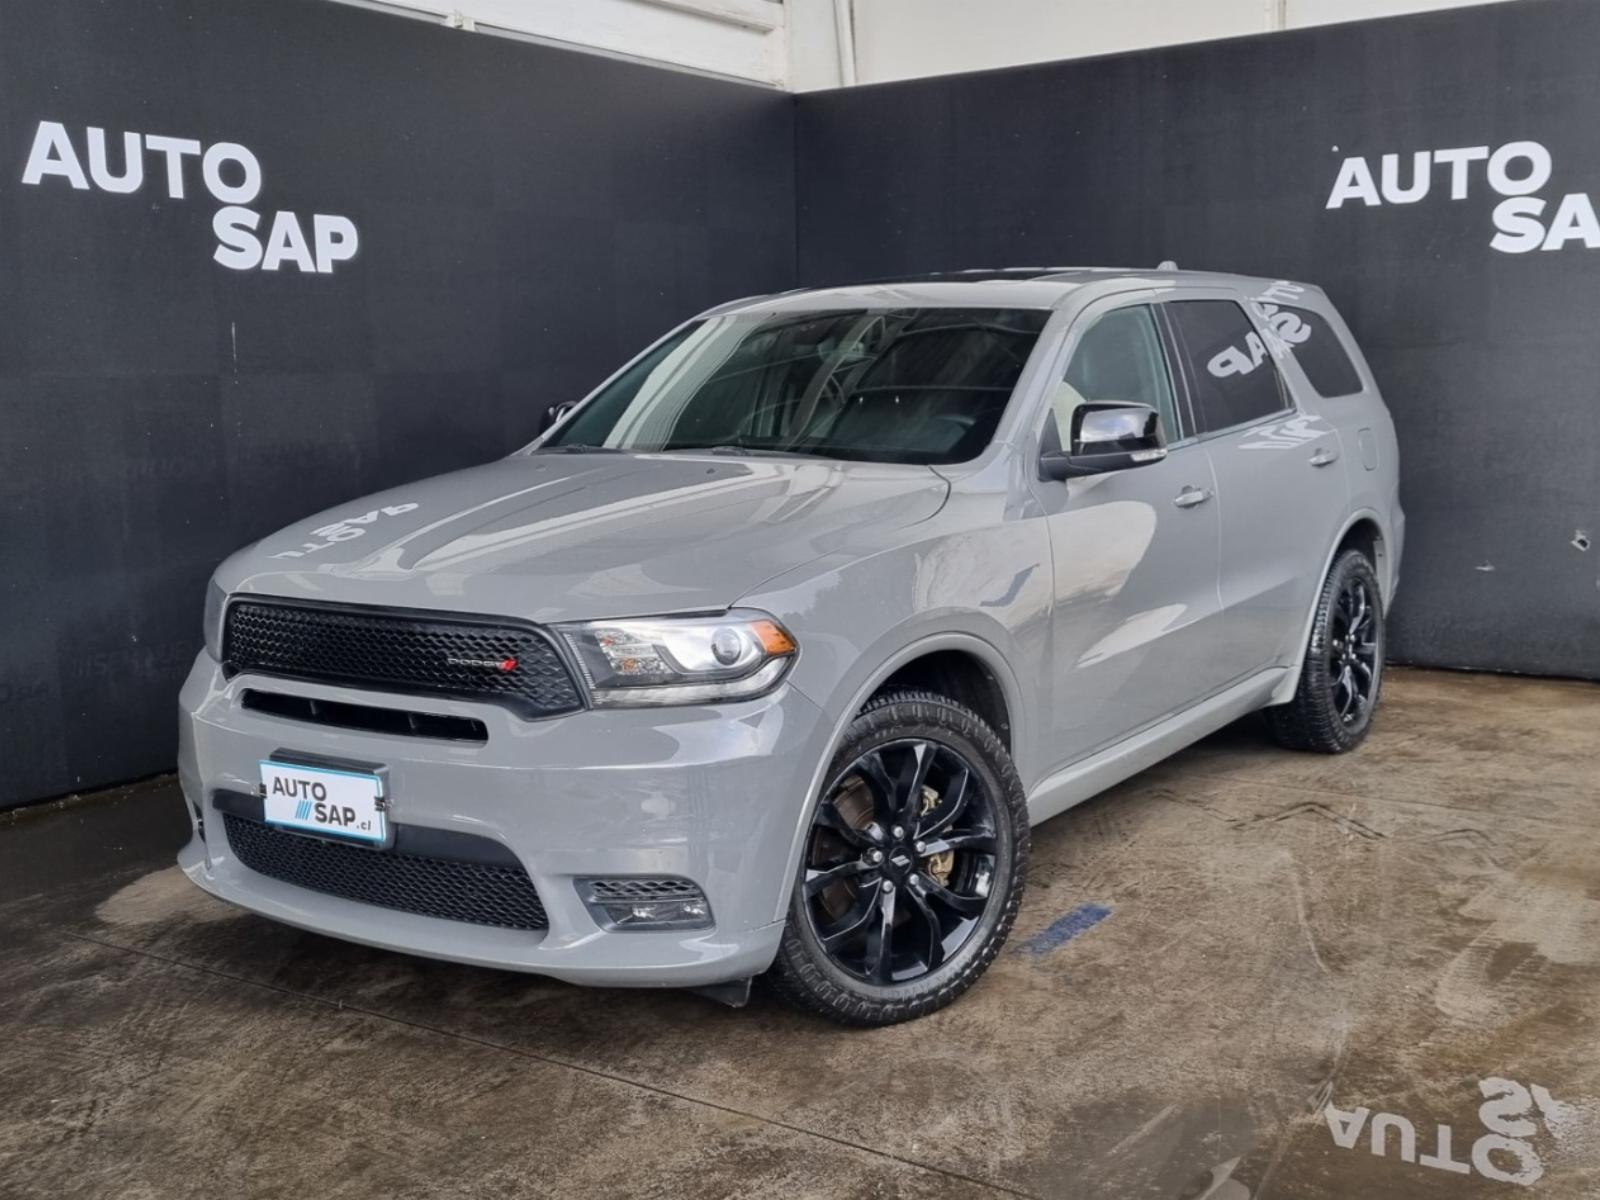 DODGE DURANGO GT LIMITED 4X4 3.6 AUT 2020 GT LIMITED - FULL MOTOR